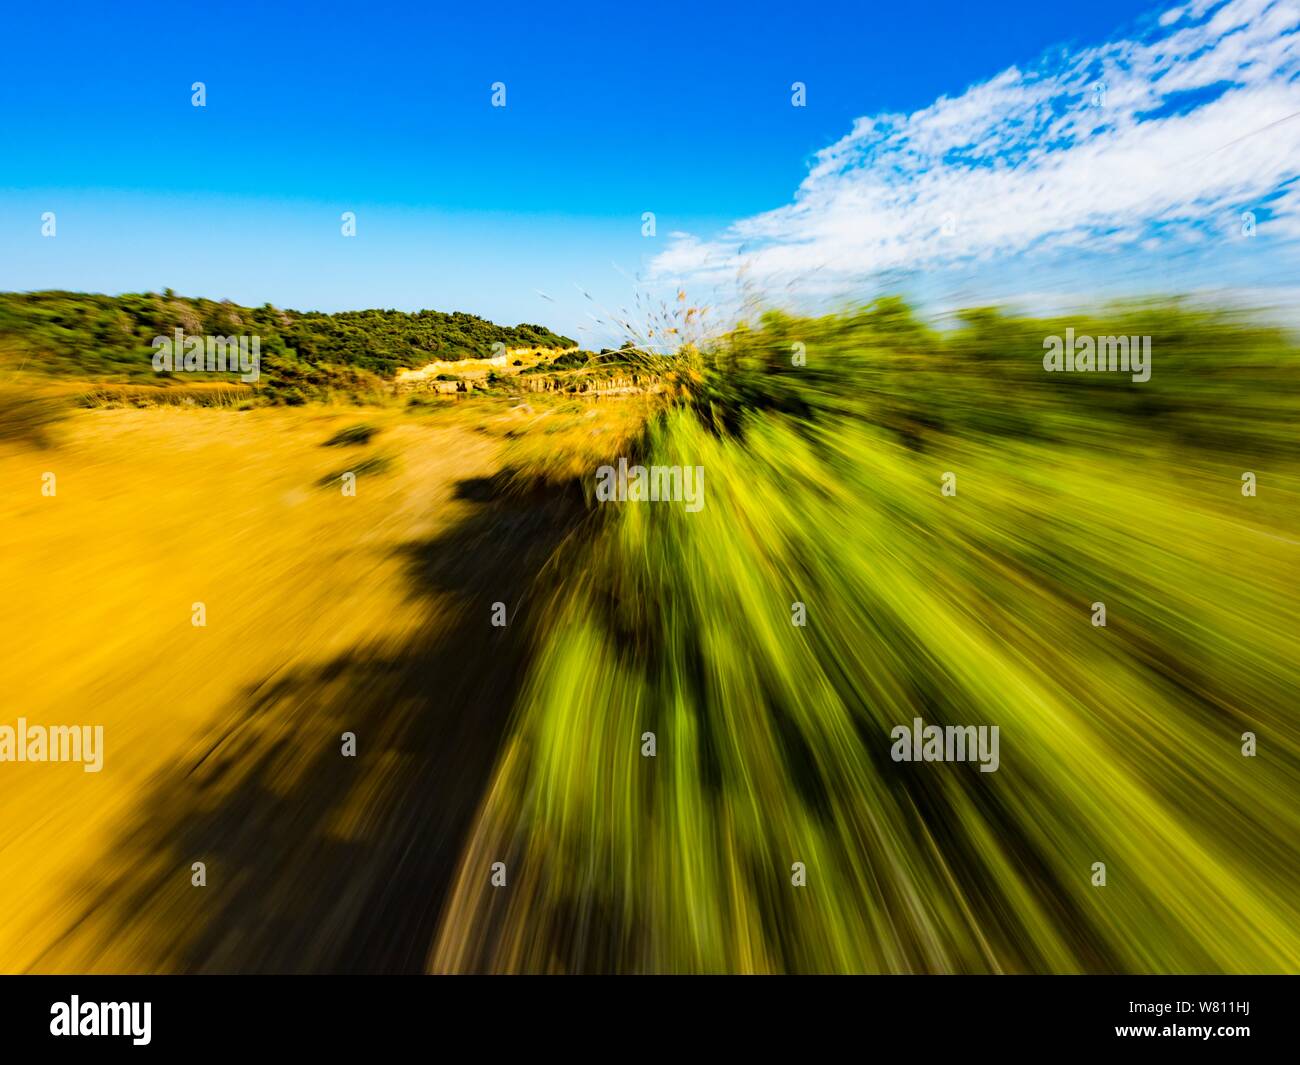 Sandy terrain vacated vacant countryside speeding low view along Green bush branches Stock Photo